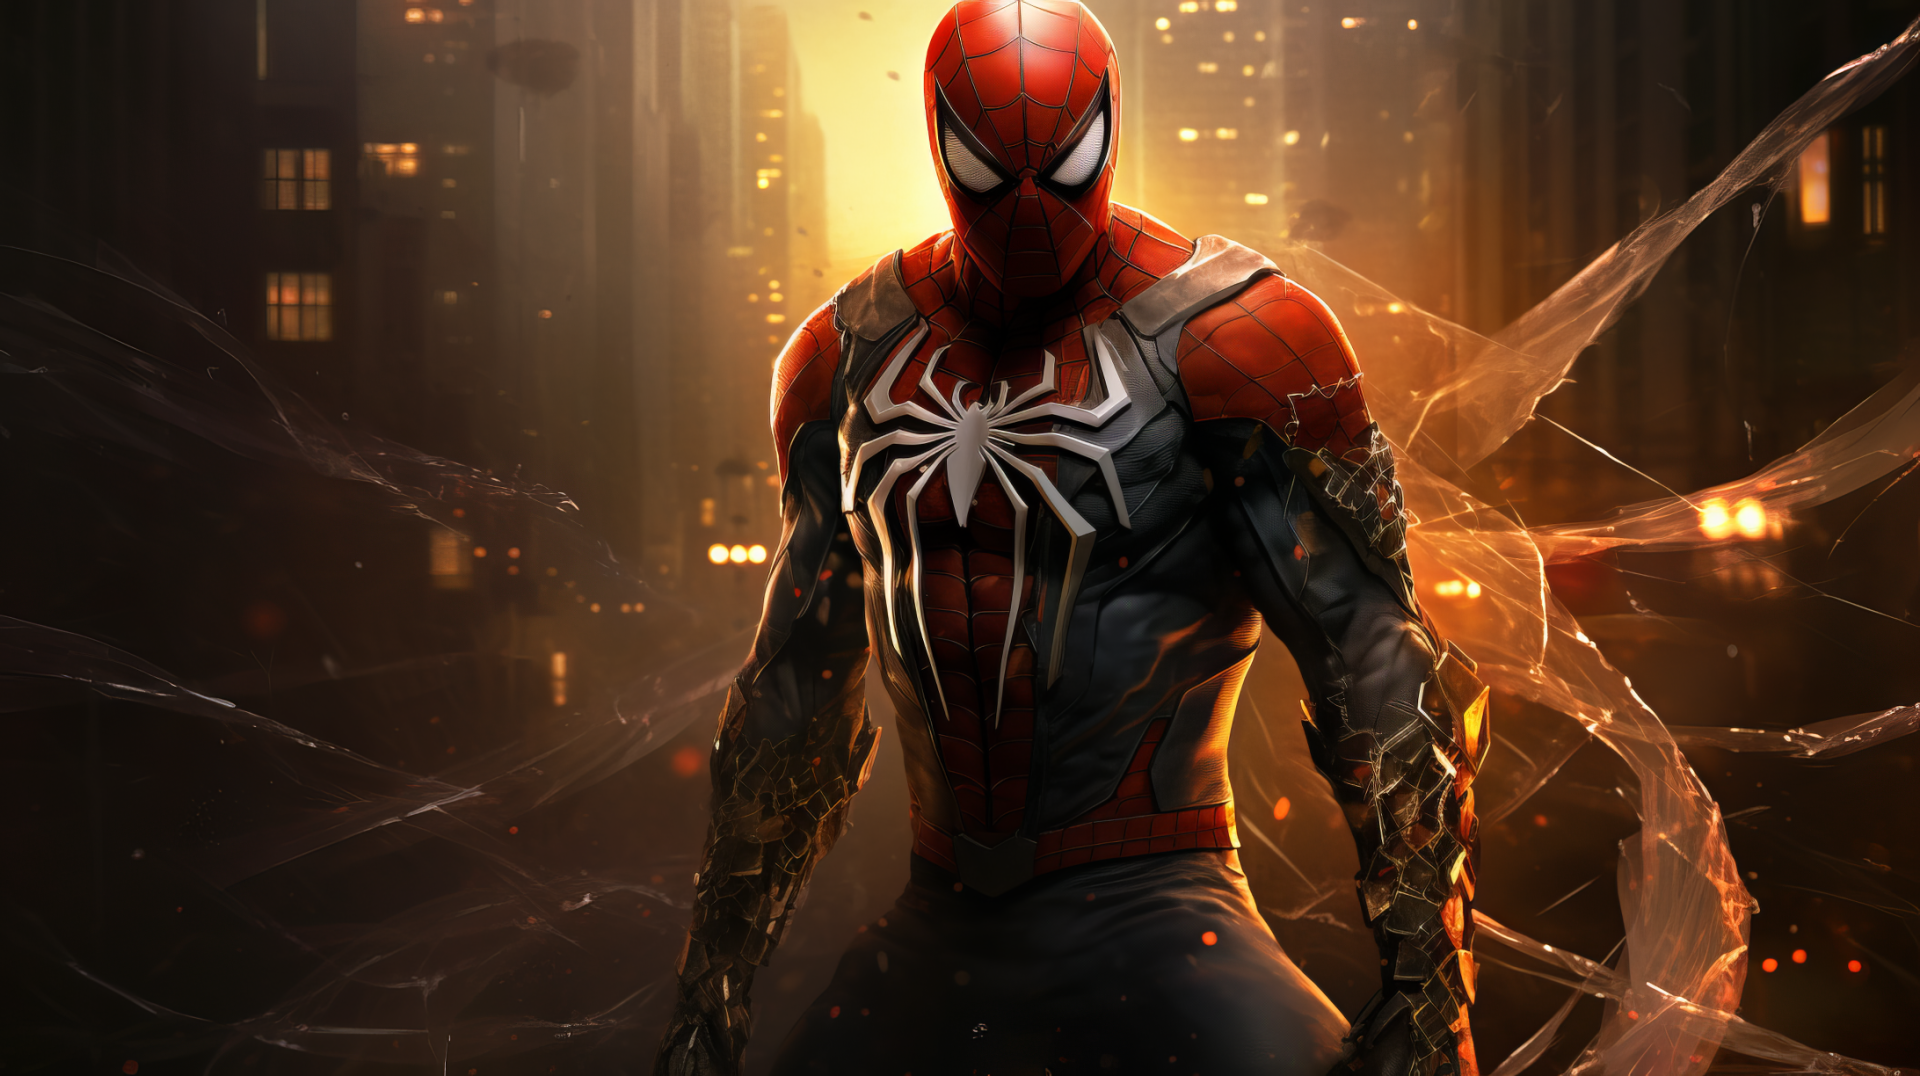 Spider Man Wallpapers - Top 125 Best Spiderman Wallpapers [ HQ ]